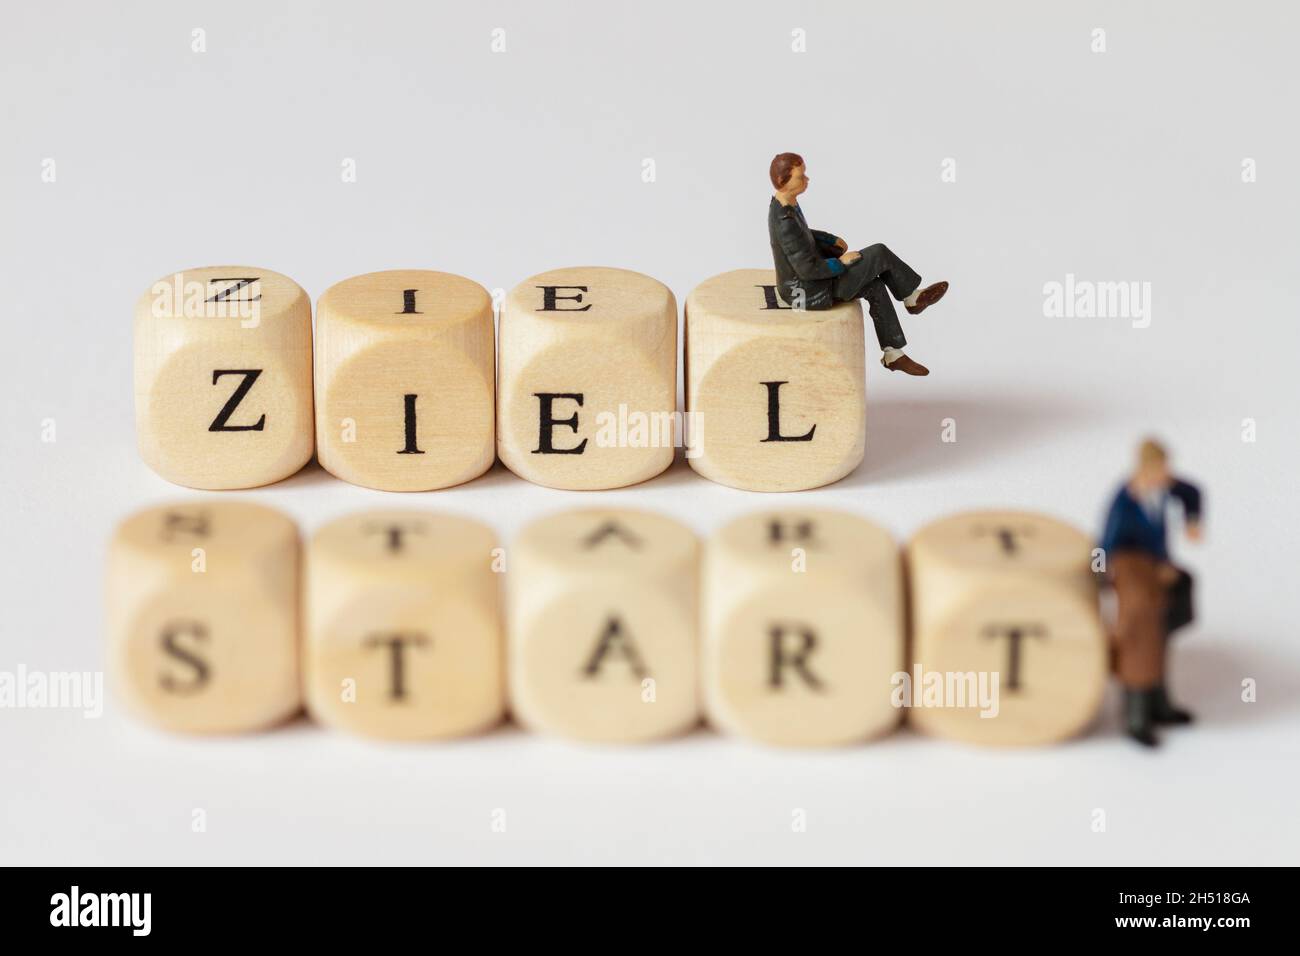 Small plastic figures with words made from letter cubes. The German word for goal and for start can be read Stock Photo